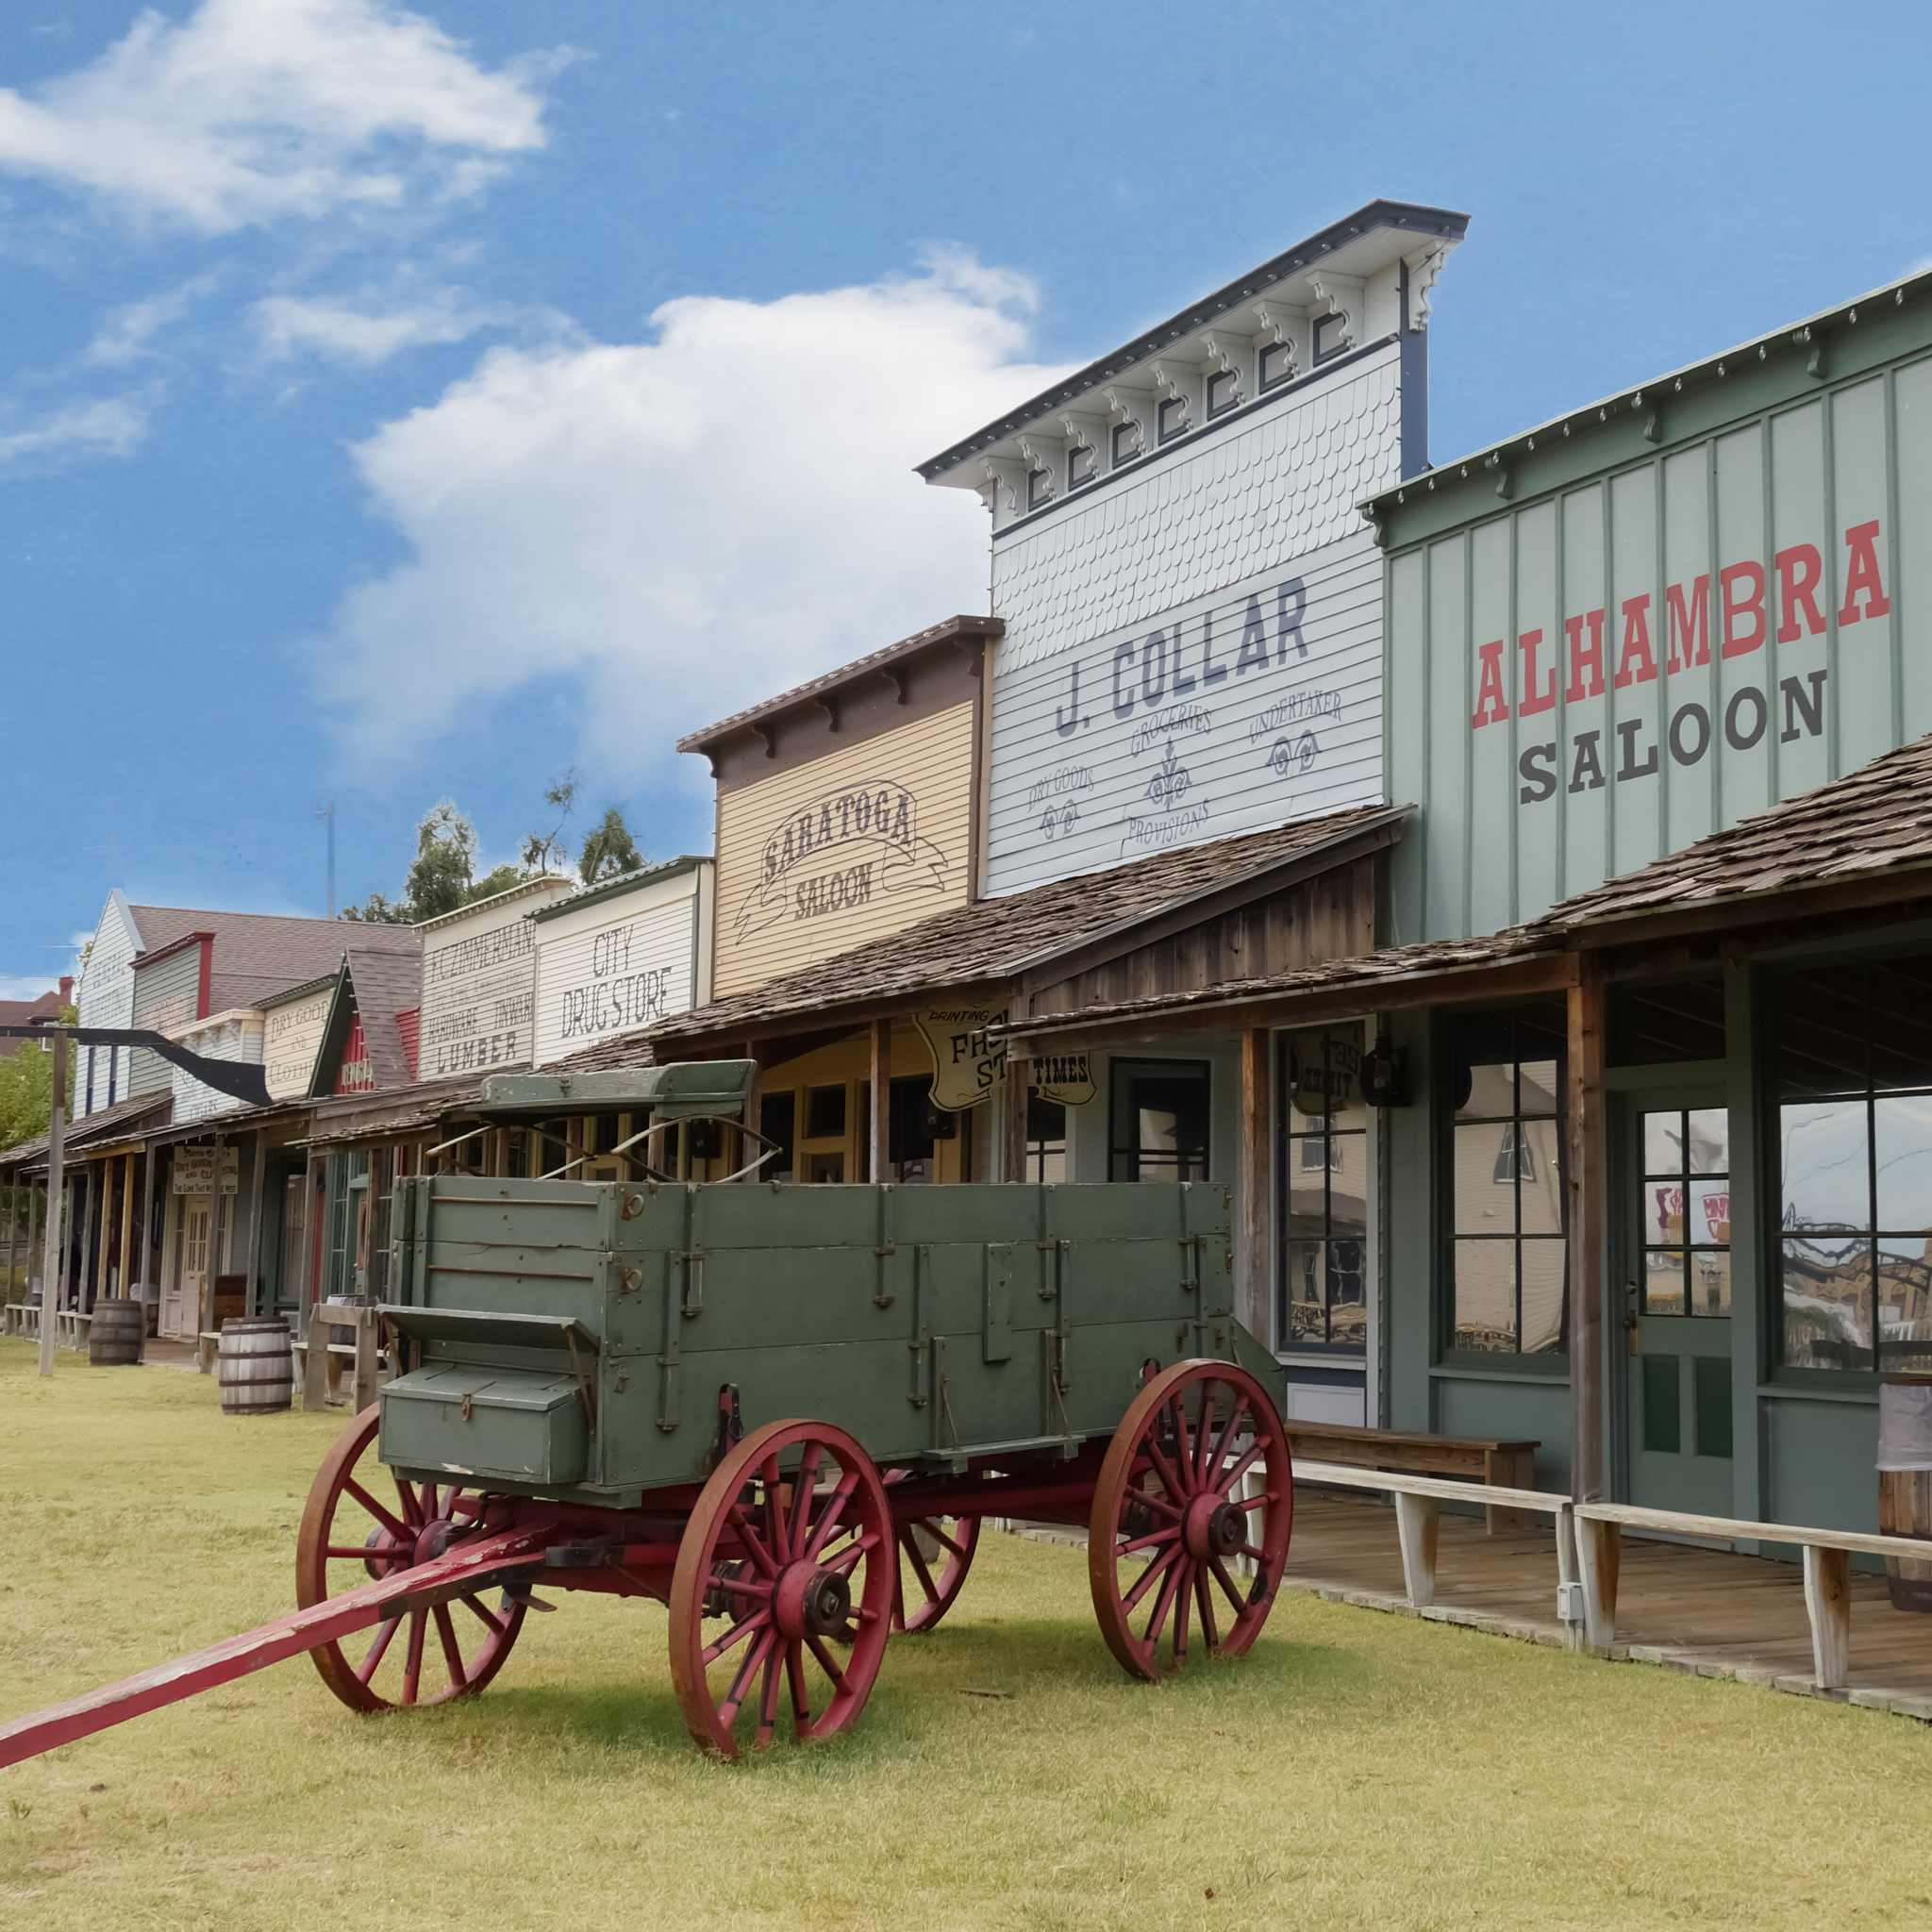 Get Out Of Dodge - Or Not! What To See In This Wild West Town